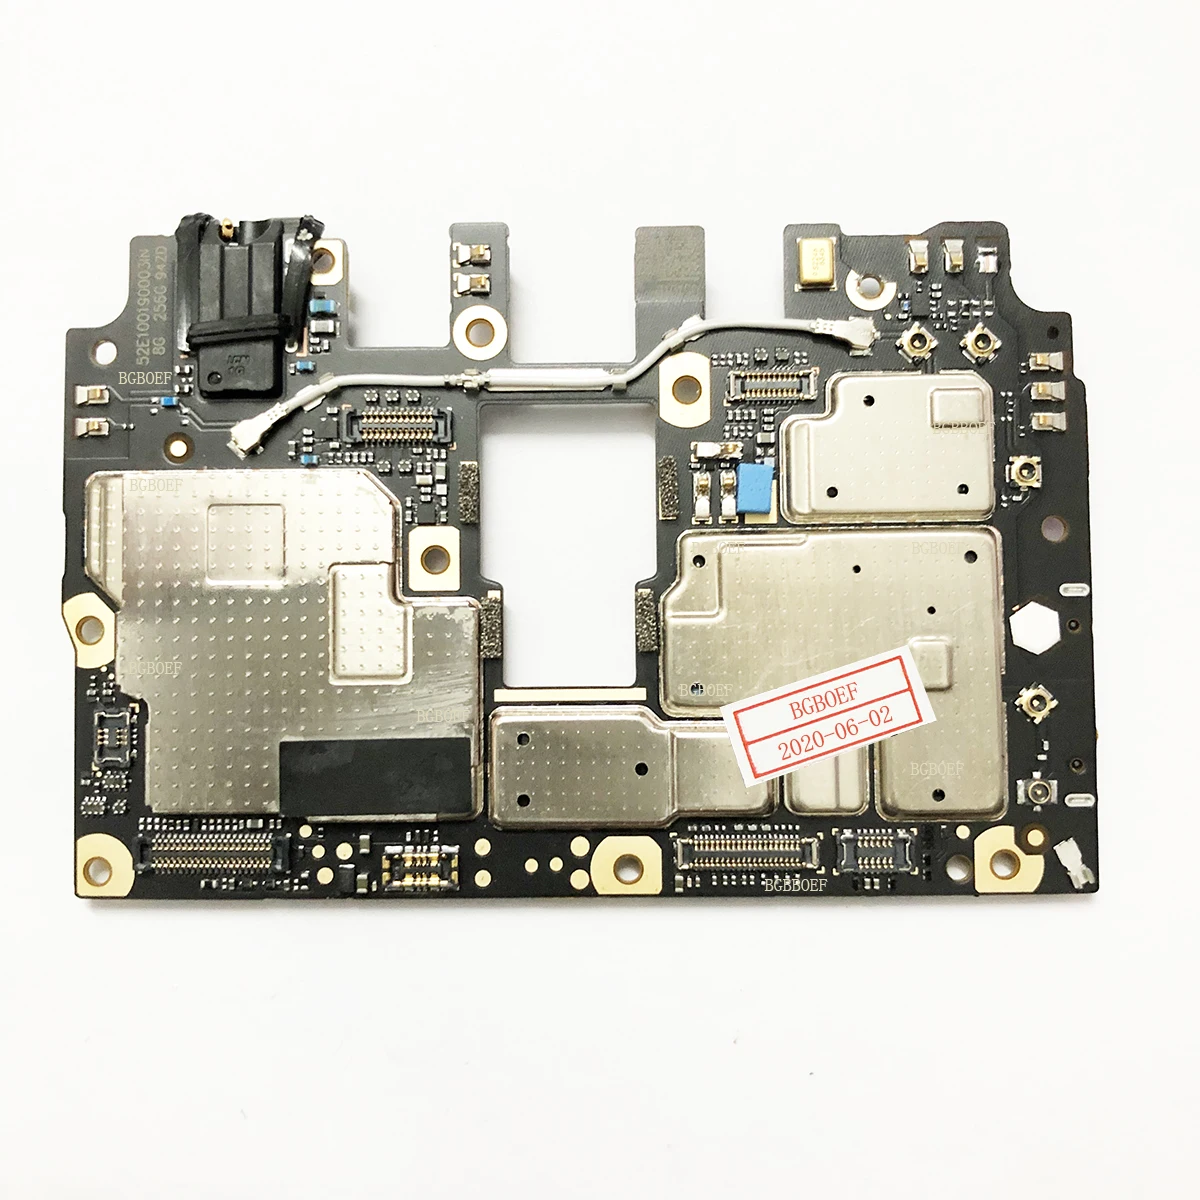 Review BGBOEF For Xiaomi Pocophone Poco F1 Motherboard  Mainboard  Original Global version Work Well Unlocked Main Circuits 6+128GB